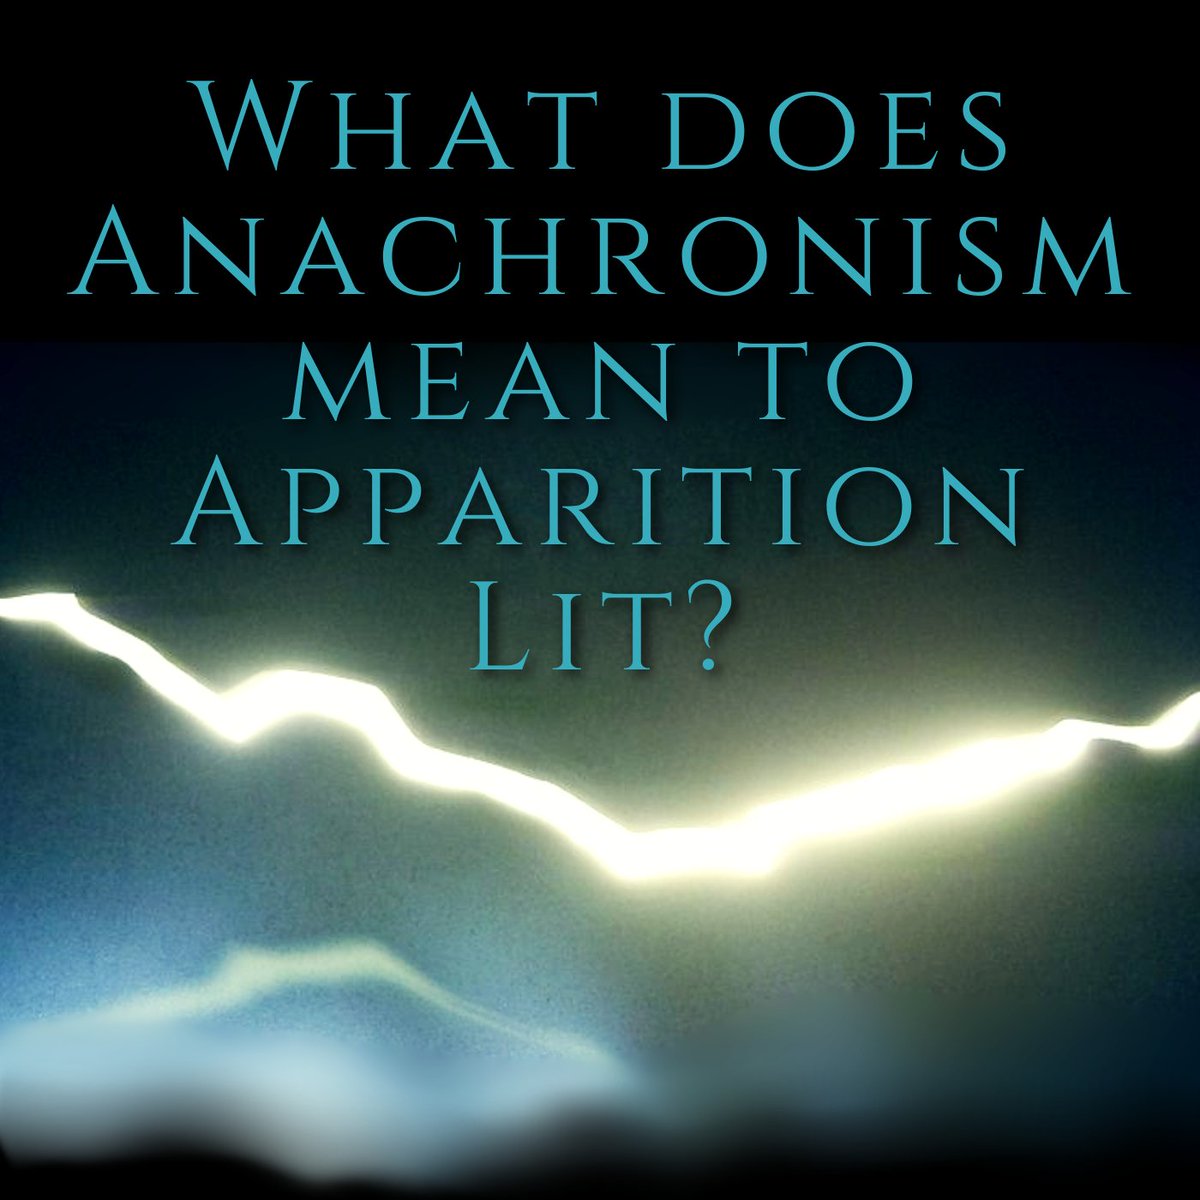 Find out what the Apparition Lit team and guest editor are hoping to see in the Anachronism submissions! apparitionlit.com/what-does-anac…